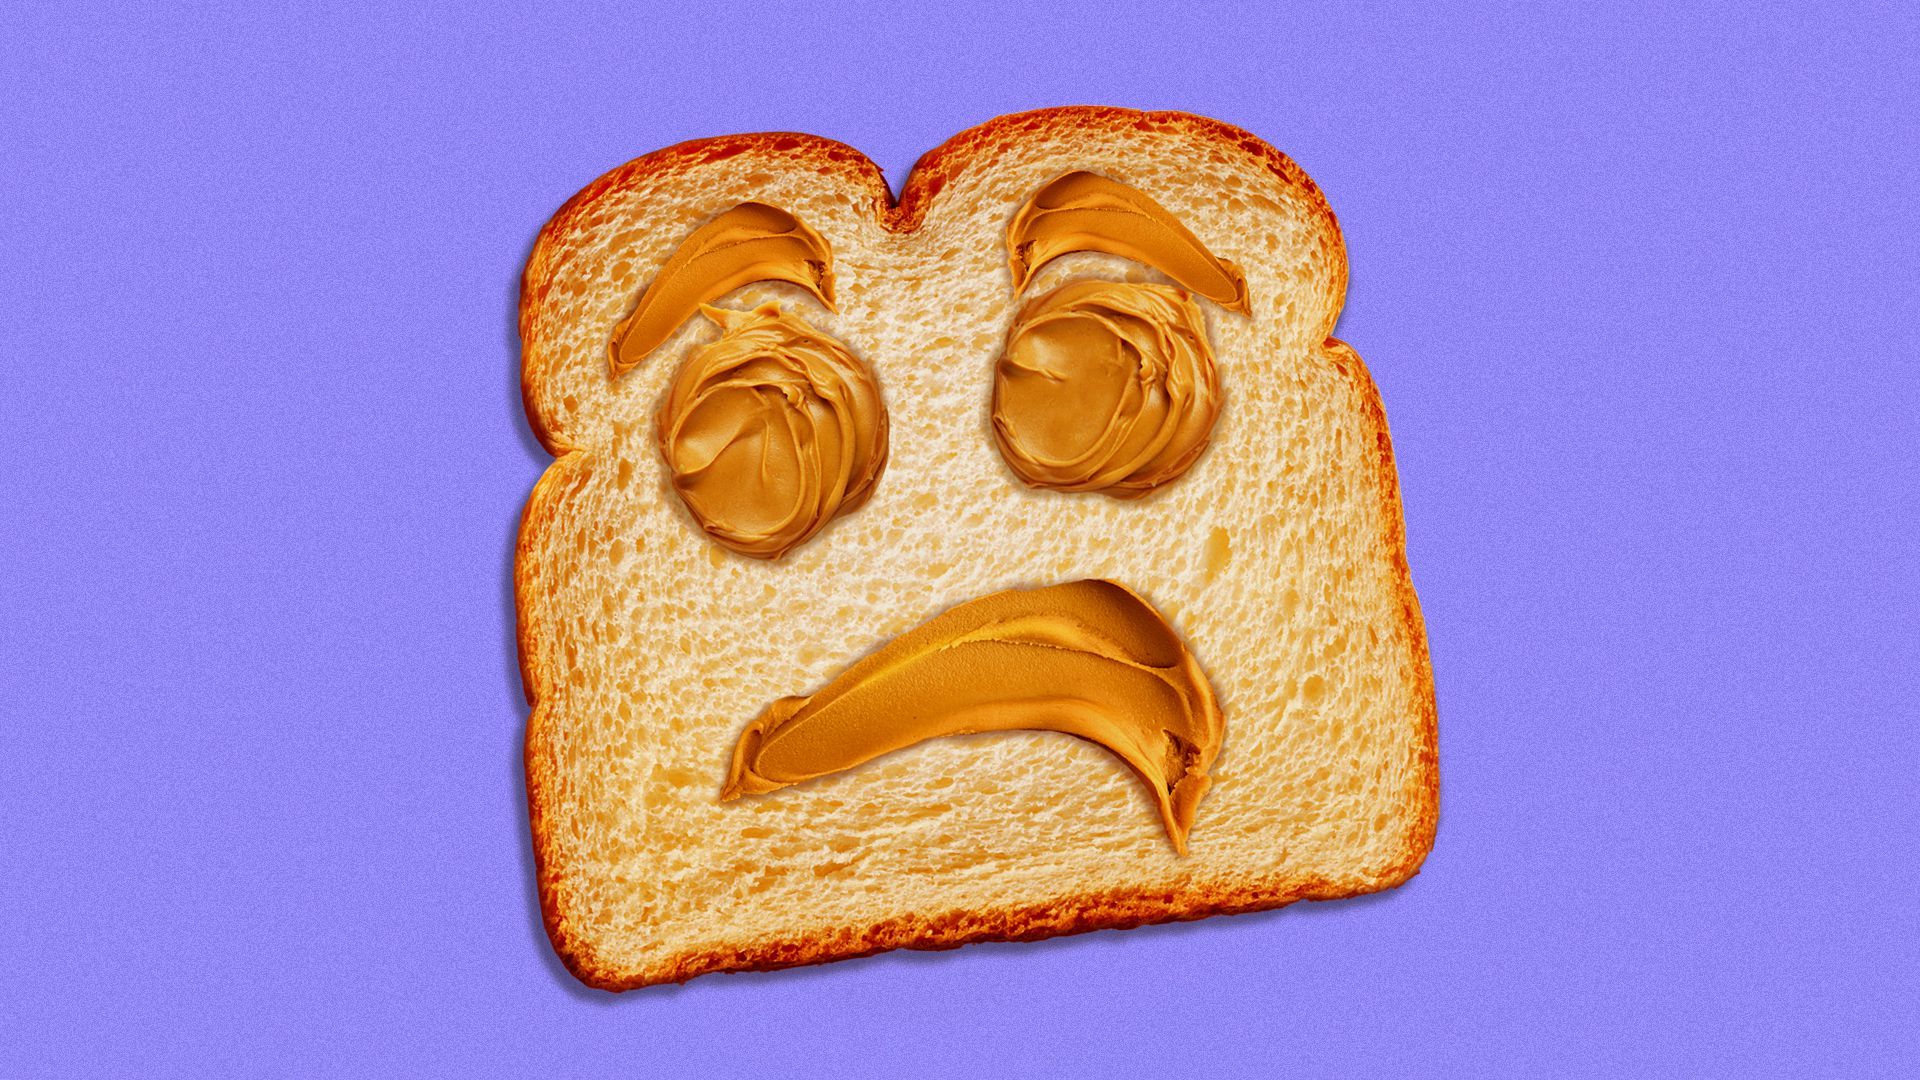 Illustration of a slice of bread with peanut butter in the shape of a worried face